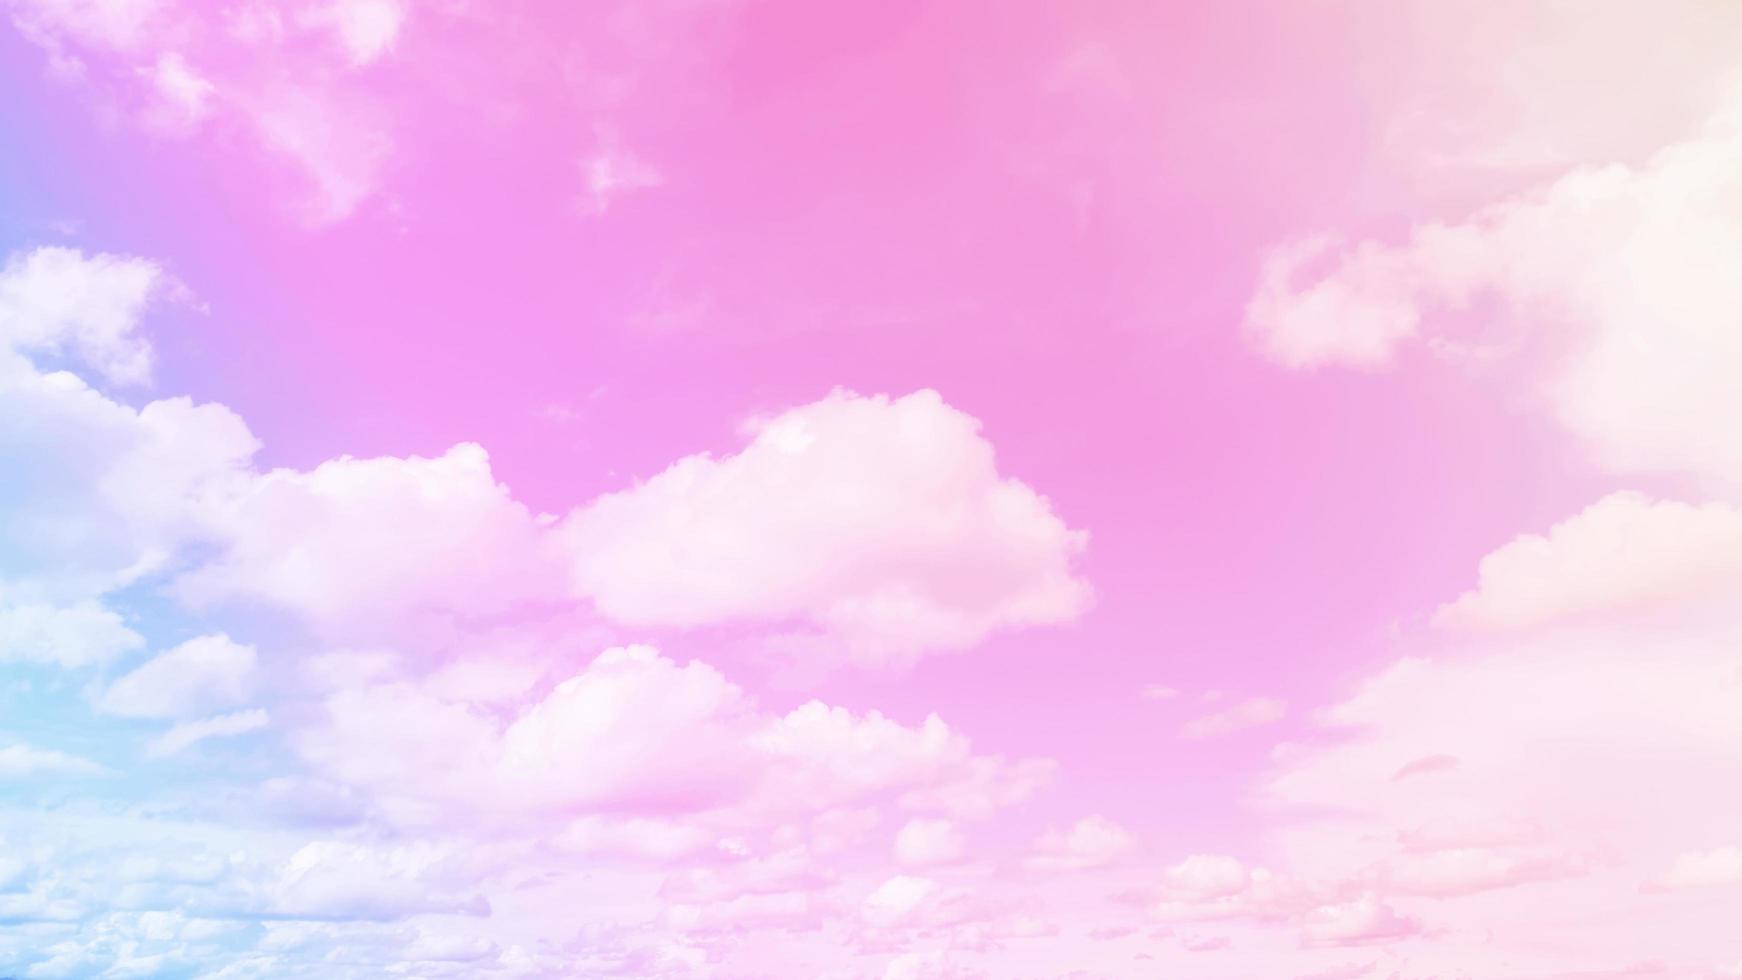 Sky and clouds in beautiful pink pastel background. Abstract sweet dreamy colored sky background and romantic photo